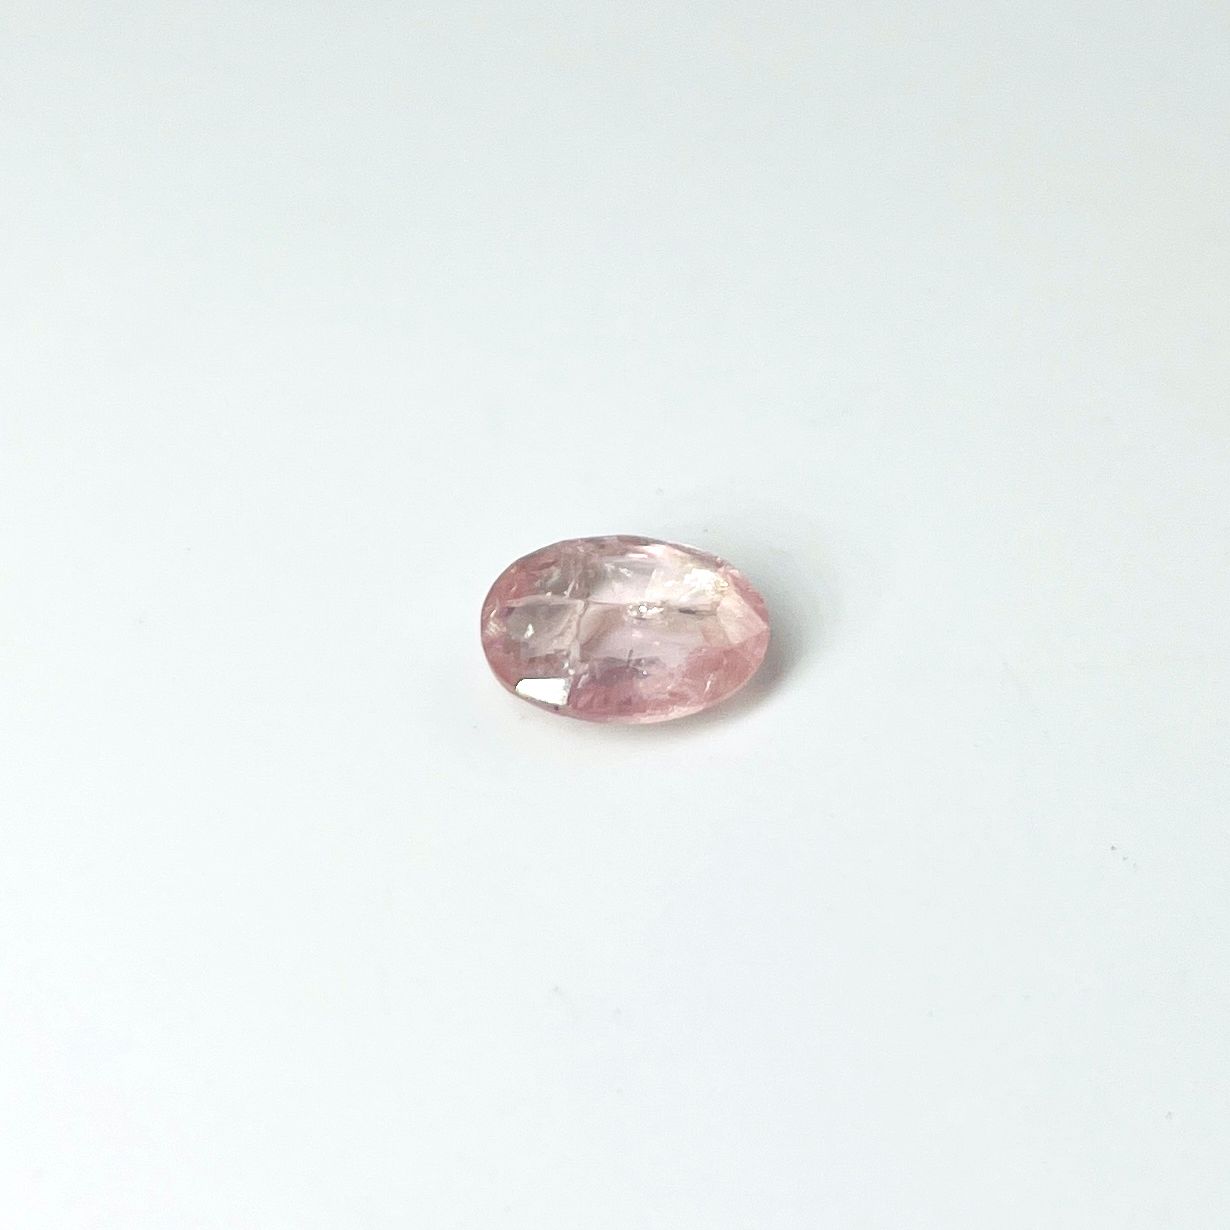 Null Oval faceted sapphire weighing 2.85 carats. With its IDT certificate.